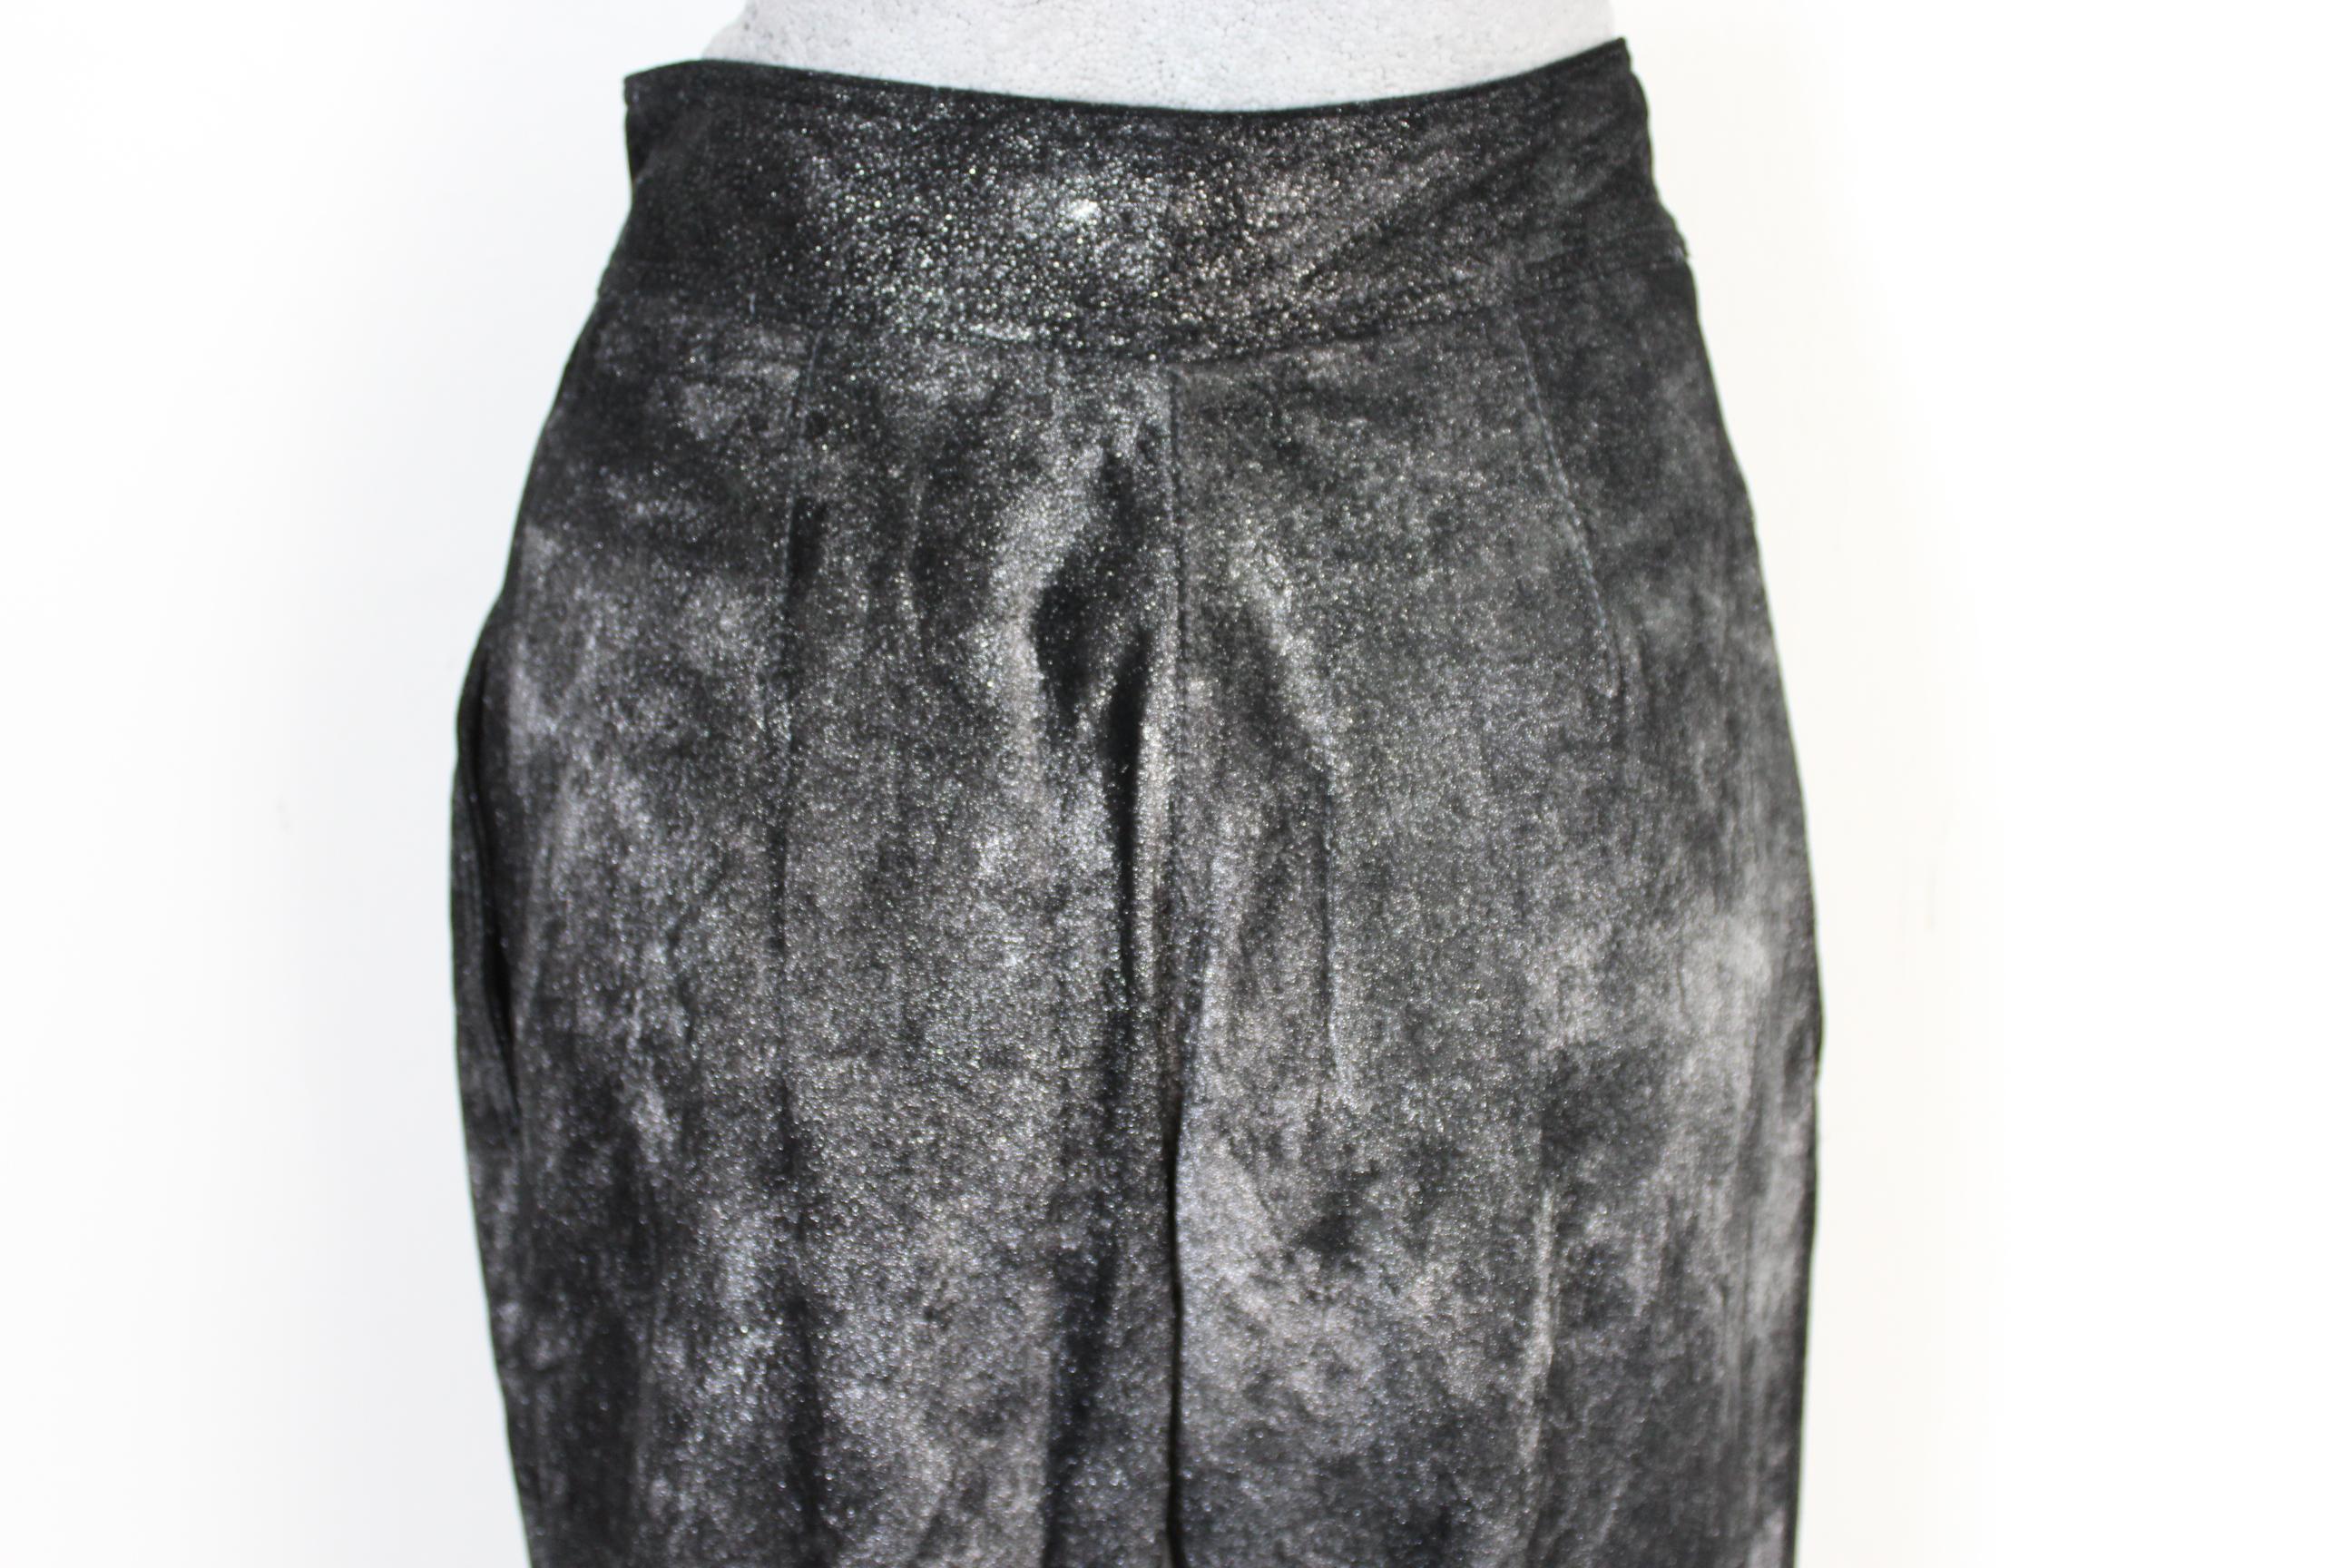 Krizia Black and Silver Pigskin Leather Pants 1980s Lamè Iridescent Style NWT For Sale 1